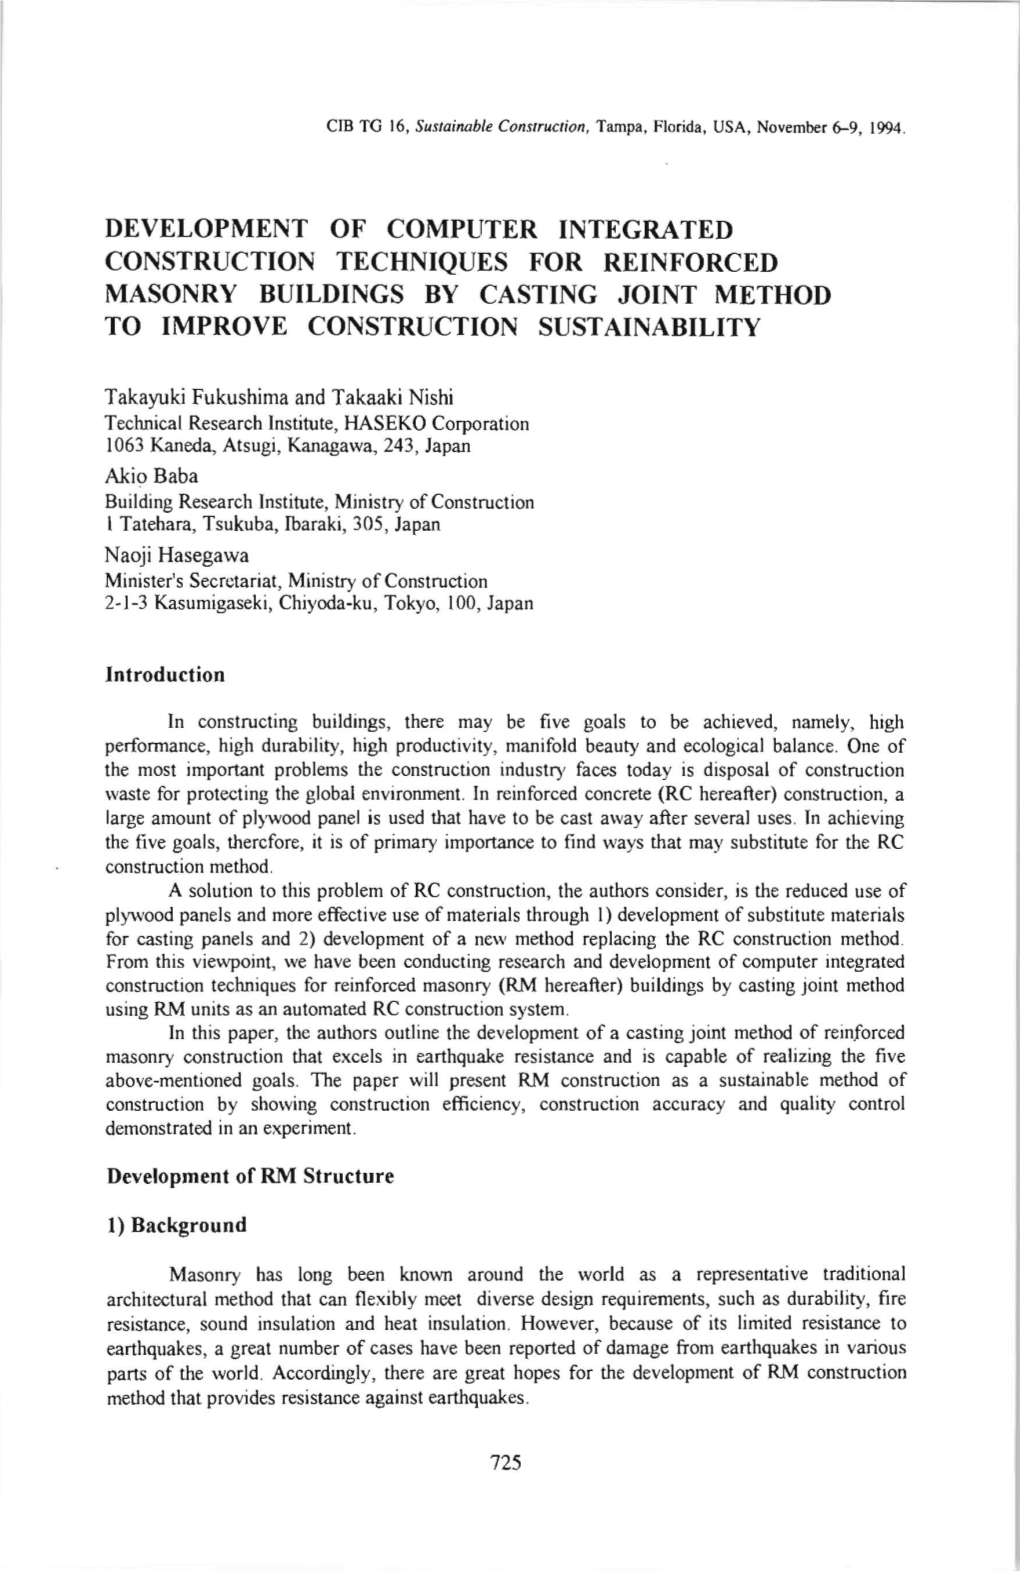 Development of Computer Integrated Construction Techniques for Reinforced Masonry Buildings by Casting Joint Method to Improve Construction Sust Ainability